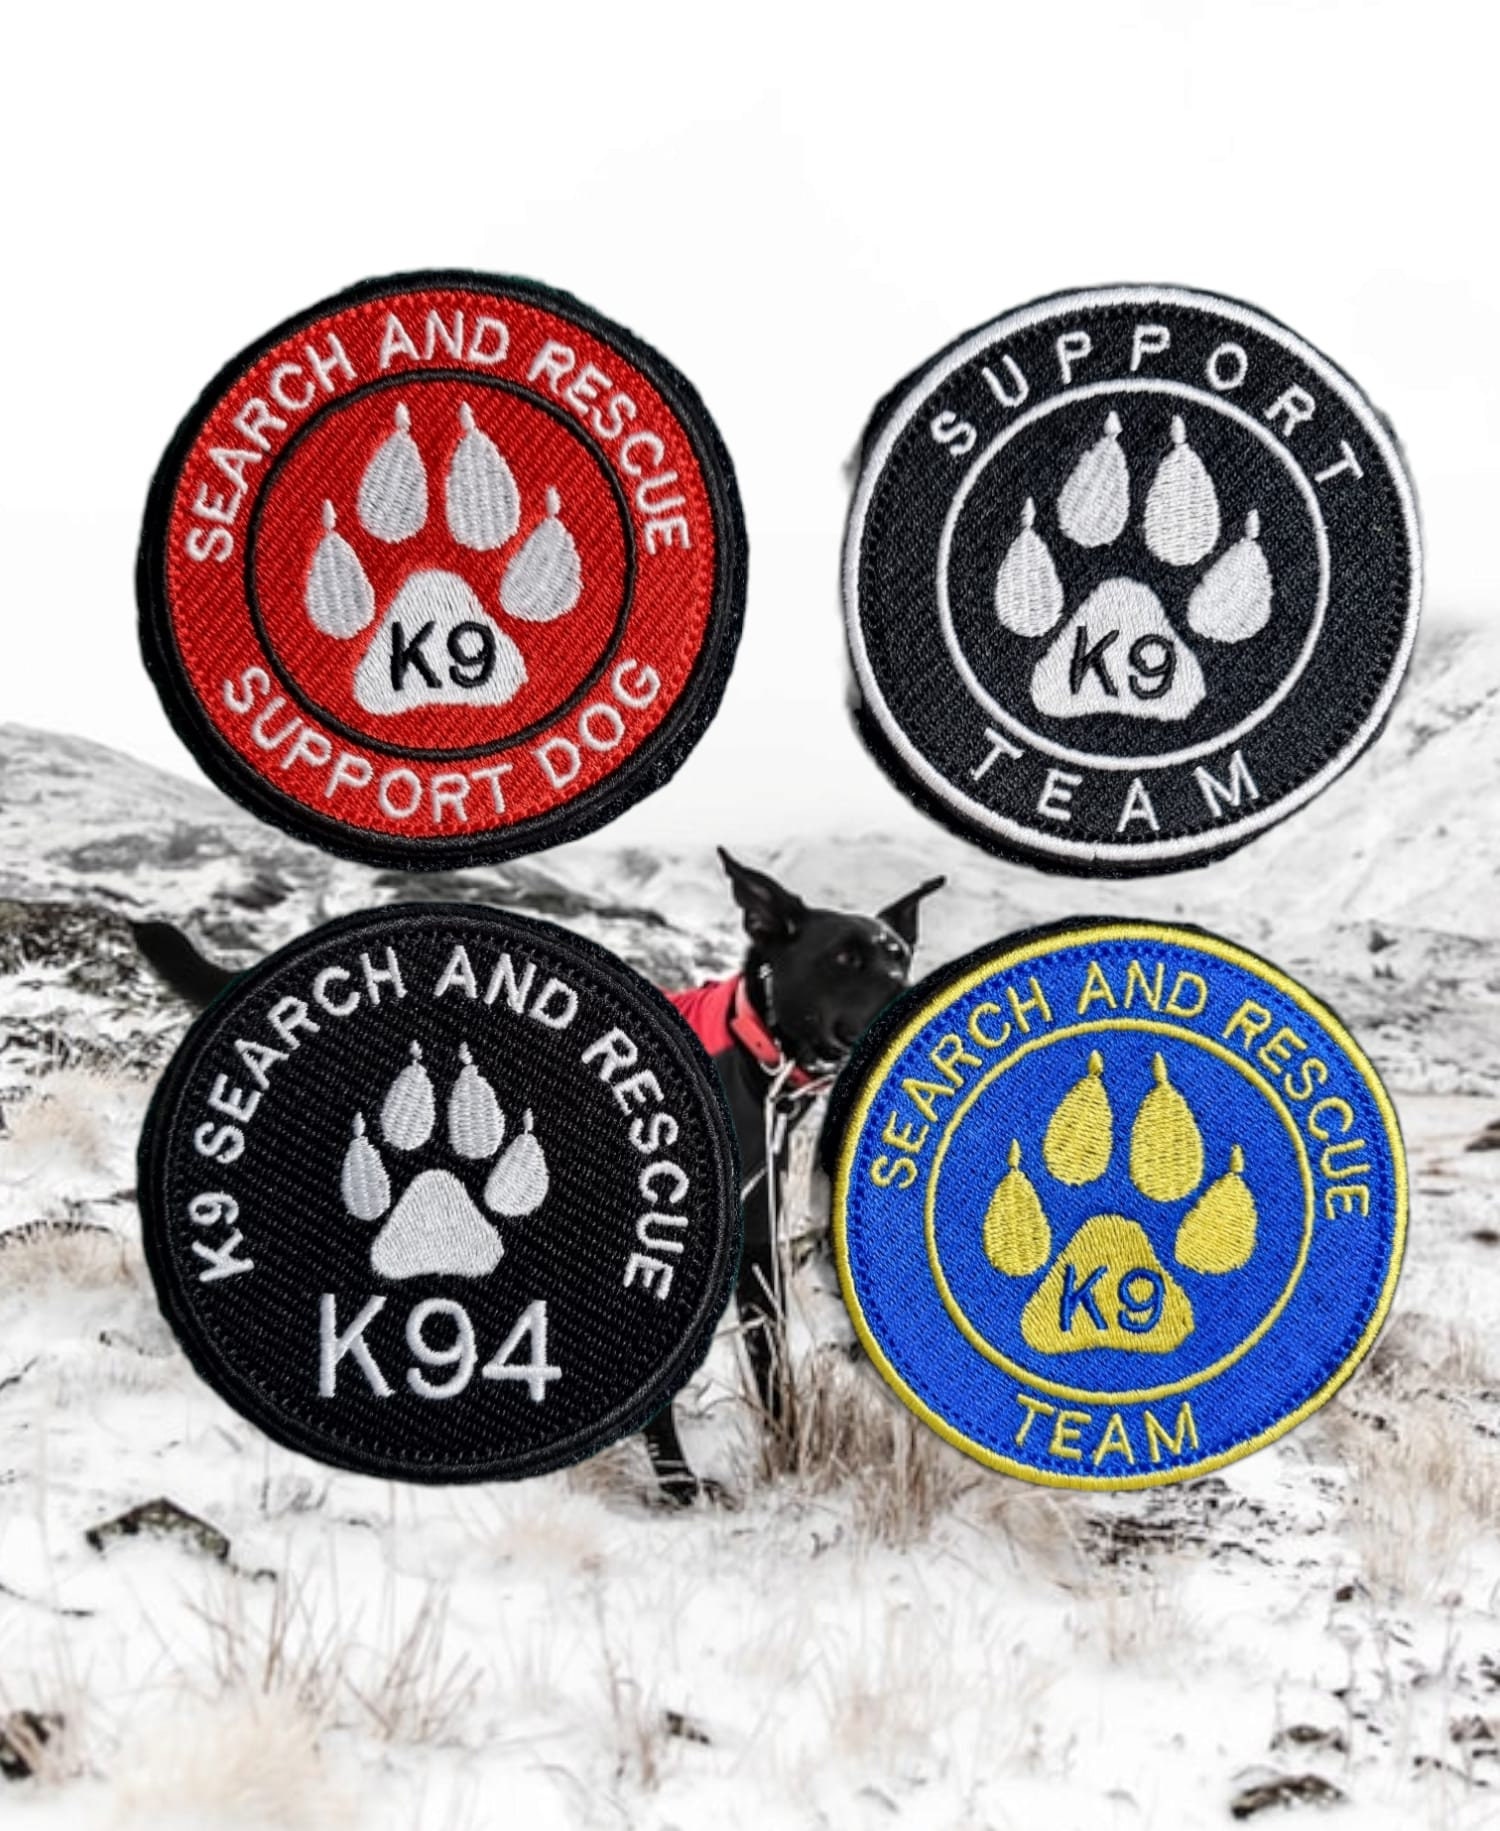 Julius K9 Type Harness Collar Custom Patch Personalised/customised High  Quality. Let Us Make Your Ideas Come to Life on a Patch 